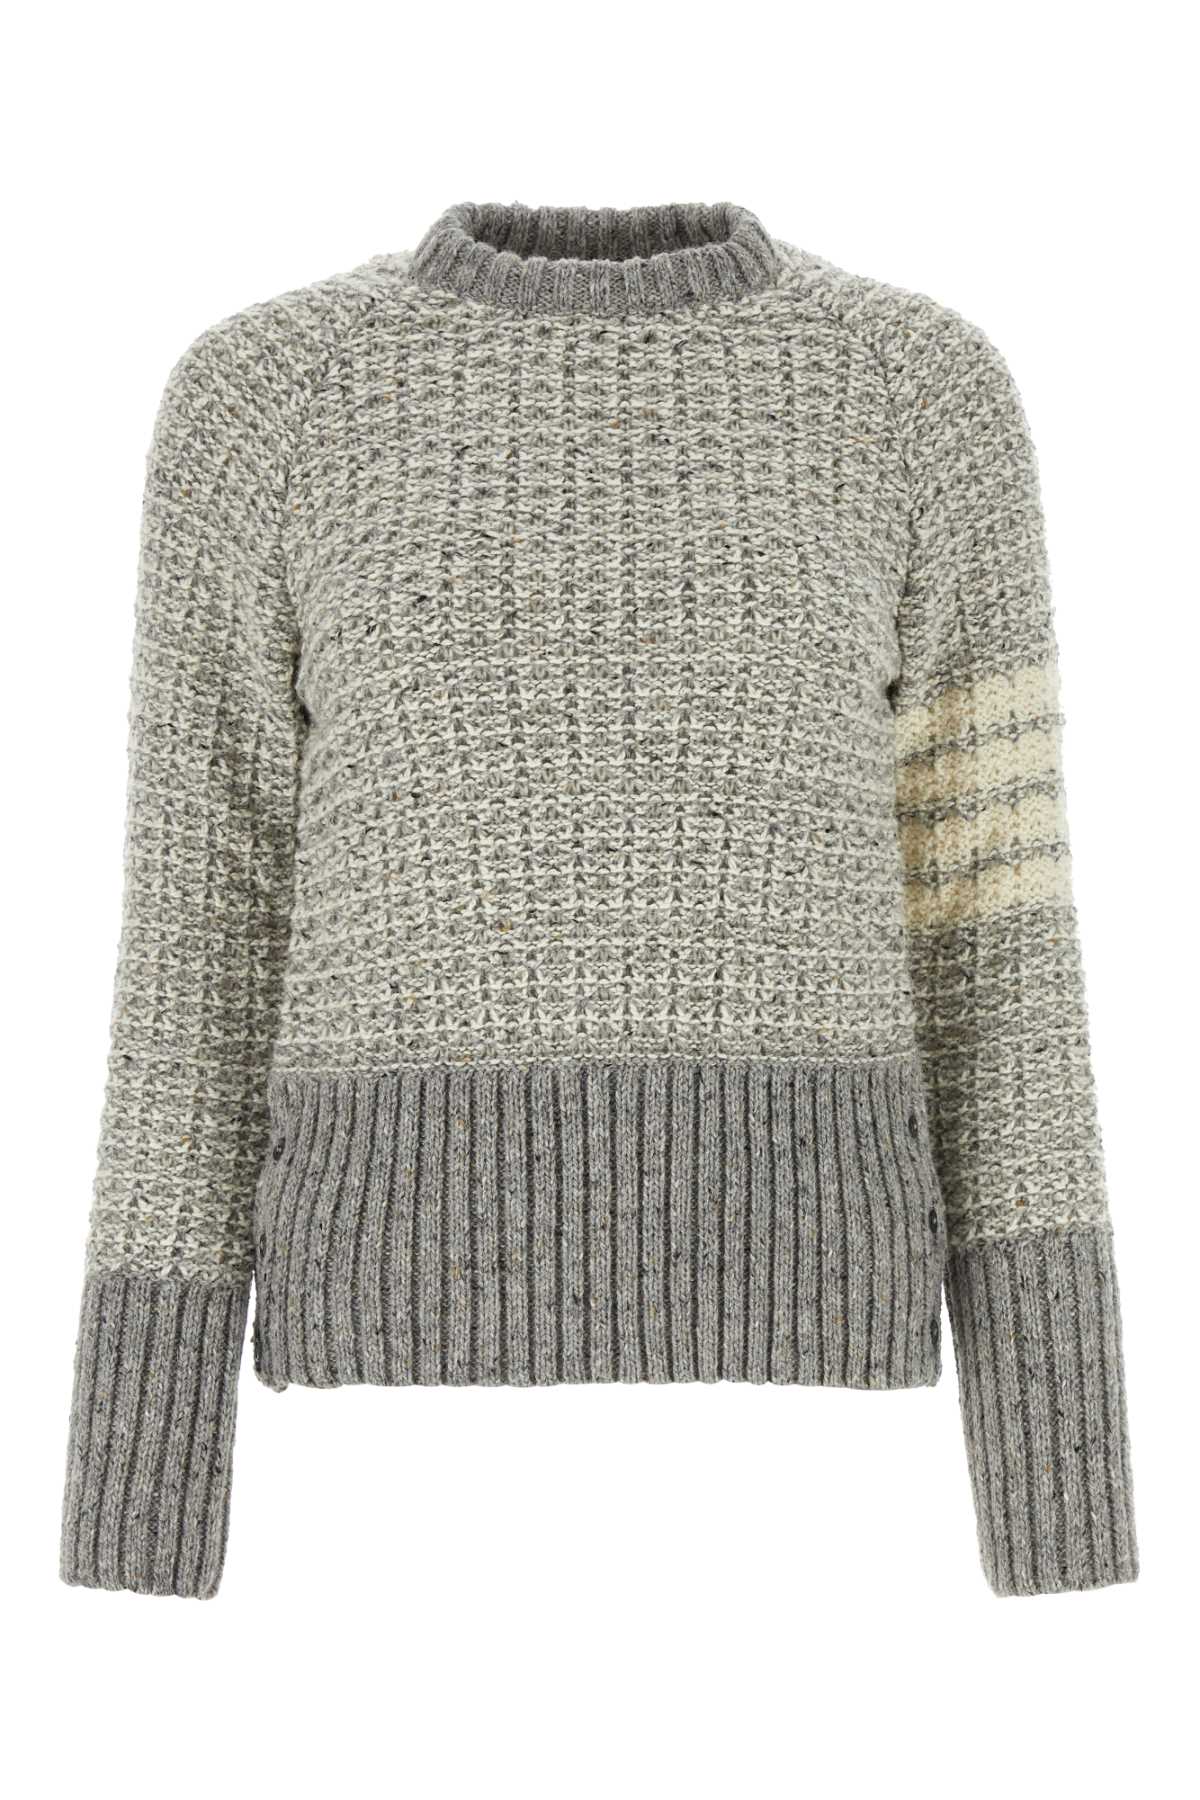 Thom Browne Embroidered Wool Blend Sweater In Ltgrey